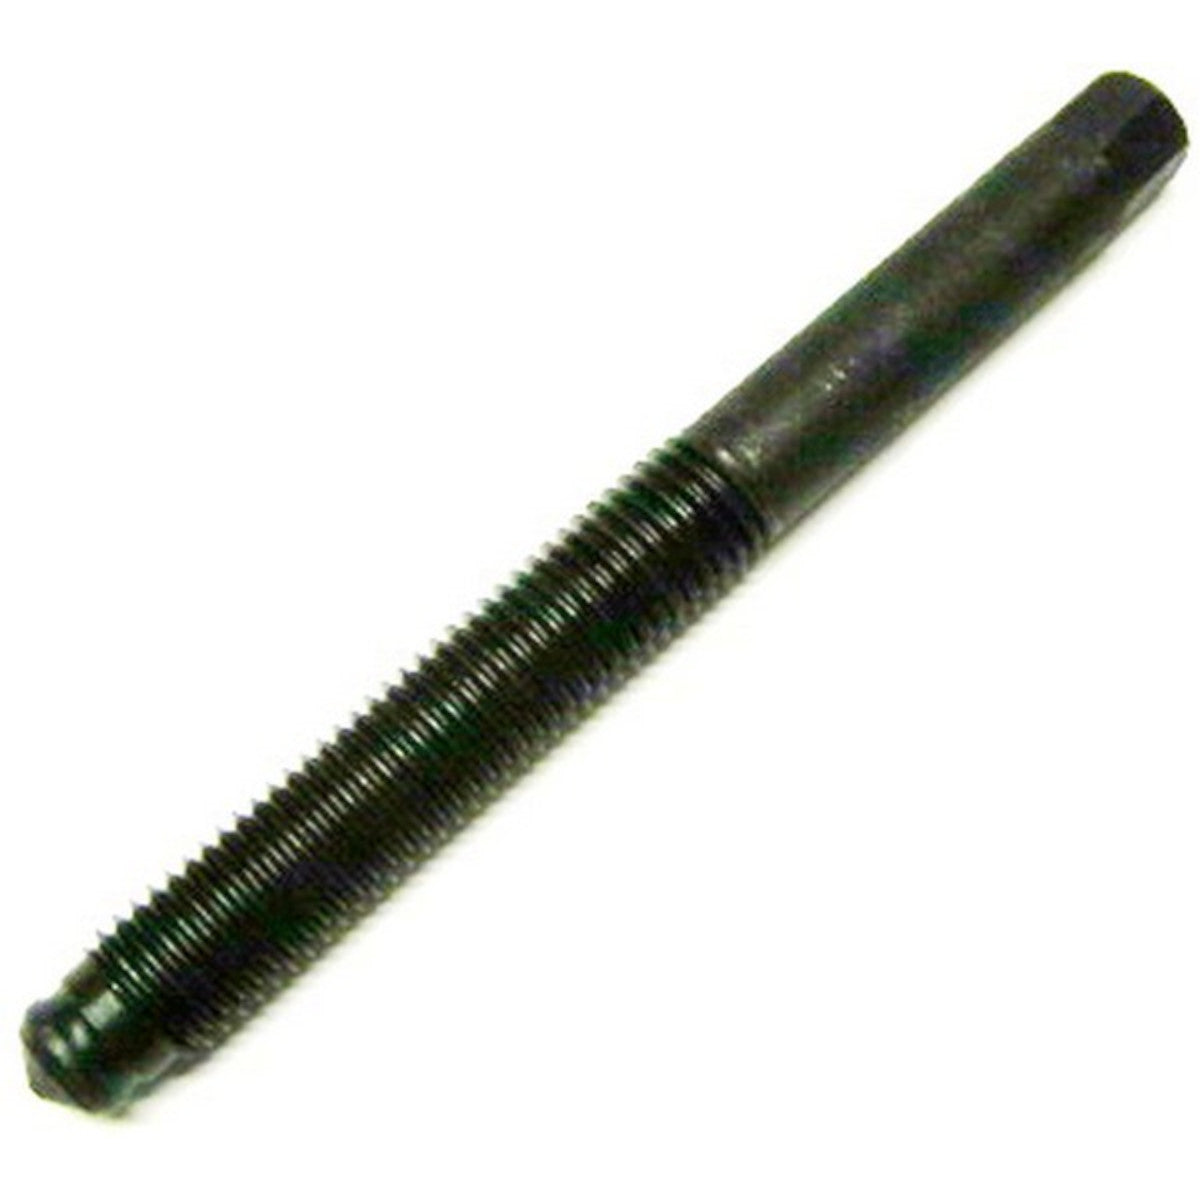 AME 11000-005 Long Set Screw Bolt (for AME 11000)